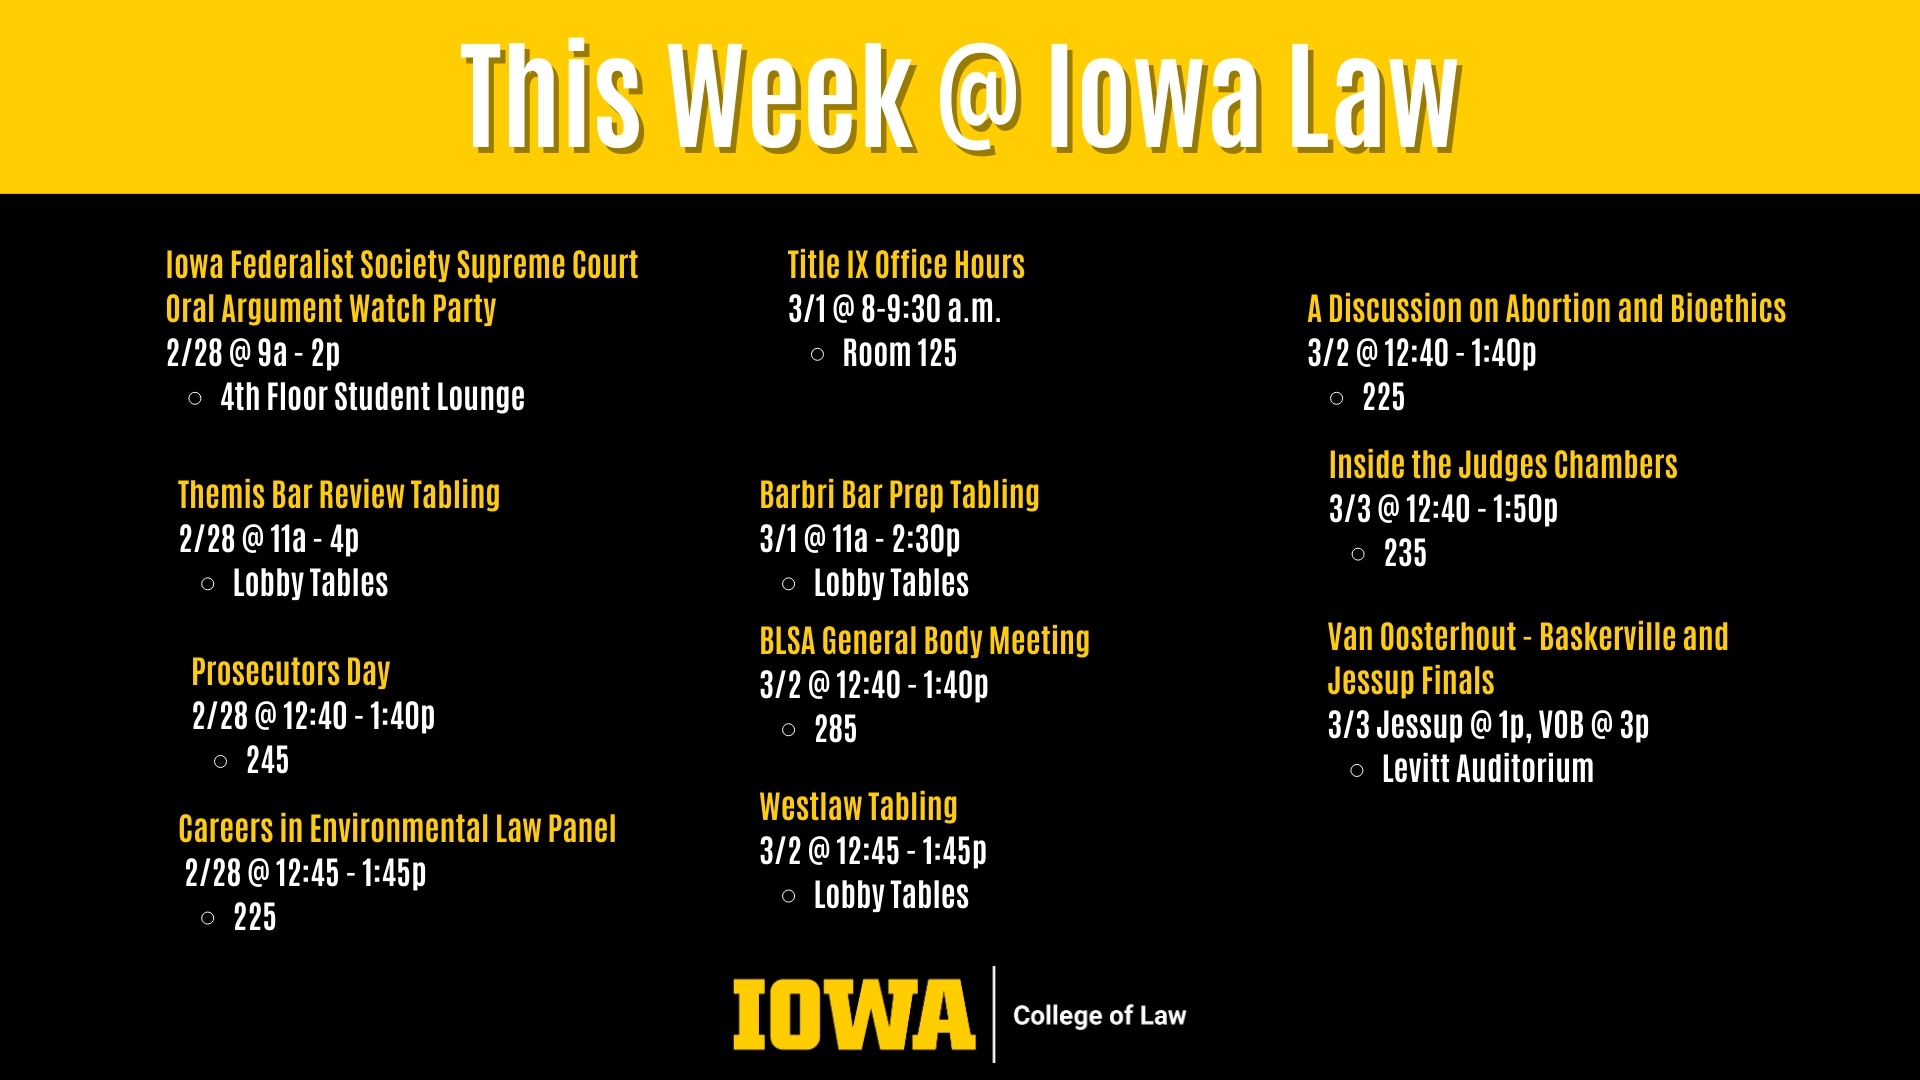 This Week @ Iowa Law Careers in Environmental Law Panel  2/28 @ 12:45 - 1:45p  225 Barbri Bar Prep Tabling 3/1 @ 11a - 2:30p  Lobby Tables BLSA General Body Meeting 3/2 @ 12:40 - 1:40p  285 Westlaw Tabling  3/2 @ 12:45 - 1:45p  Lobby Tables Prosecutors Day 2/28 @ 12:40 - 1:40p  245 Themis Bar Review Tabling 2/28 @ 11a - 4p  Lobby Tables Iowa Federalist Society Supreme Court Oral Argument Watch Party 2/28 @ 9a - 2p  4th Floor Student Lounge A Discussion on Abortion and Bioethics 3/2 @ 12:40 - 1:40p  225 Inside the Judges Chambers 3/3 @ 12:40 - 1:50p  235 Van Oosterhout - Baskerville and Jessup Finals 3/3 Jessup @ 1p, VOB @ 3p Levitt Auditorium